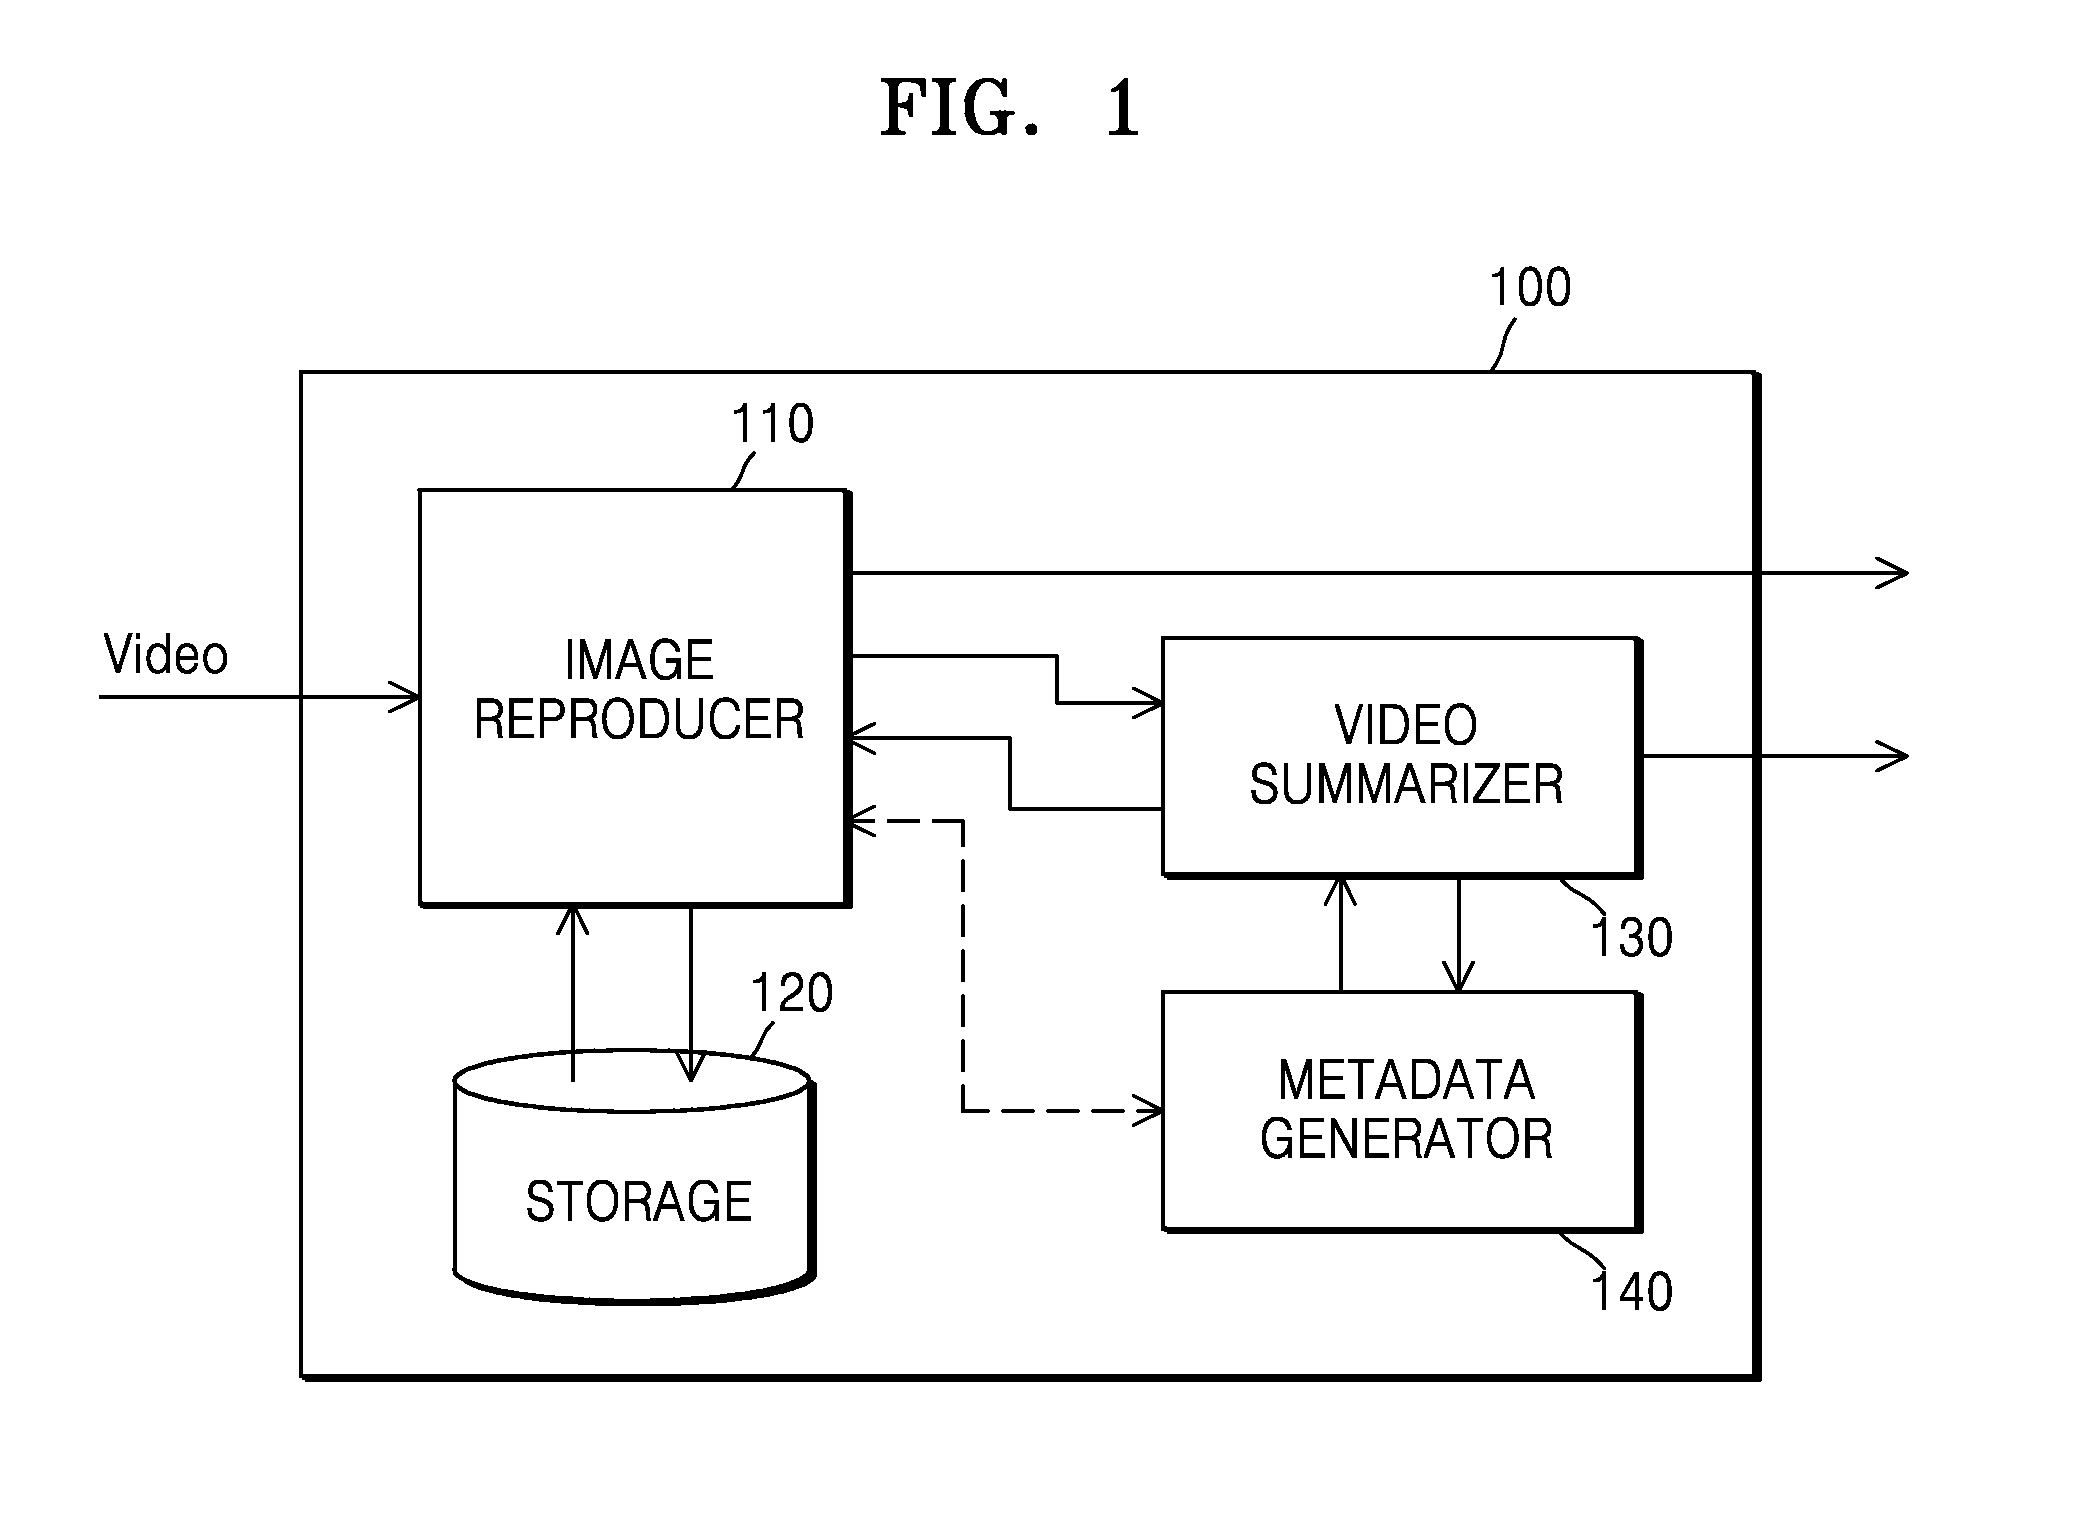 Imaging apparatus and method of providing imaging information